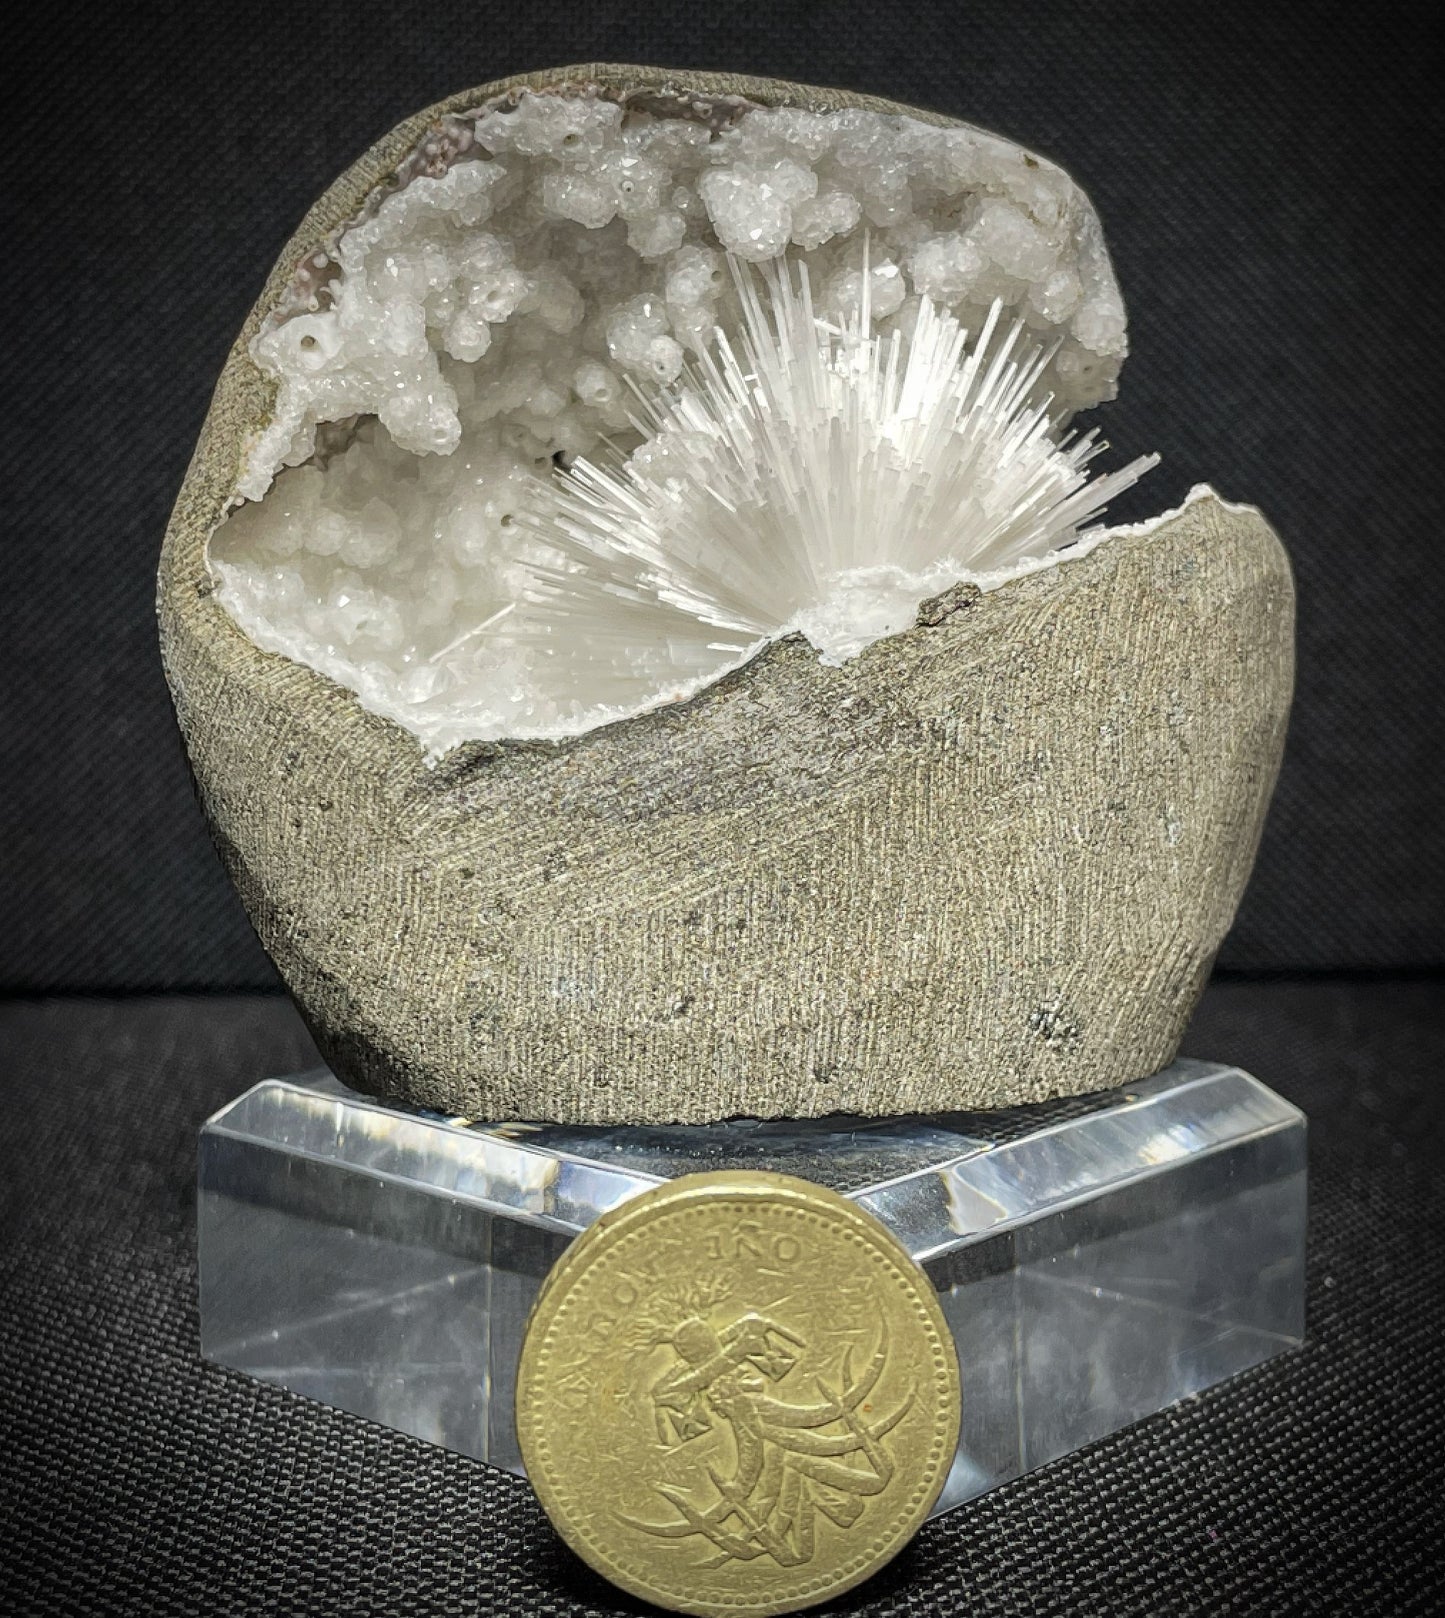 Delicate Scolecite And Chalcedony Geode From India Collectors Specimen From Aurangabad, Maharashtra, India